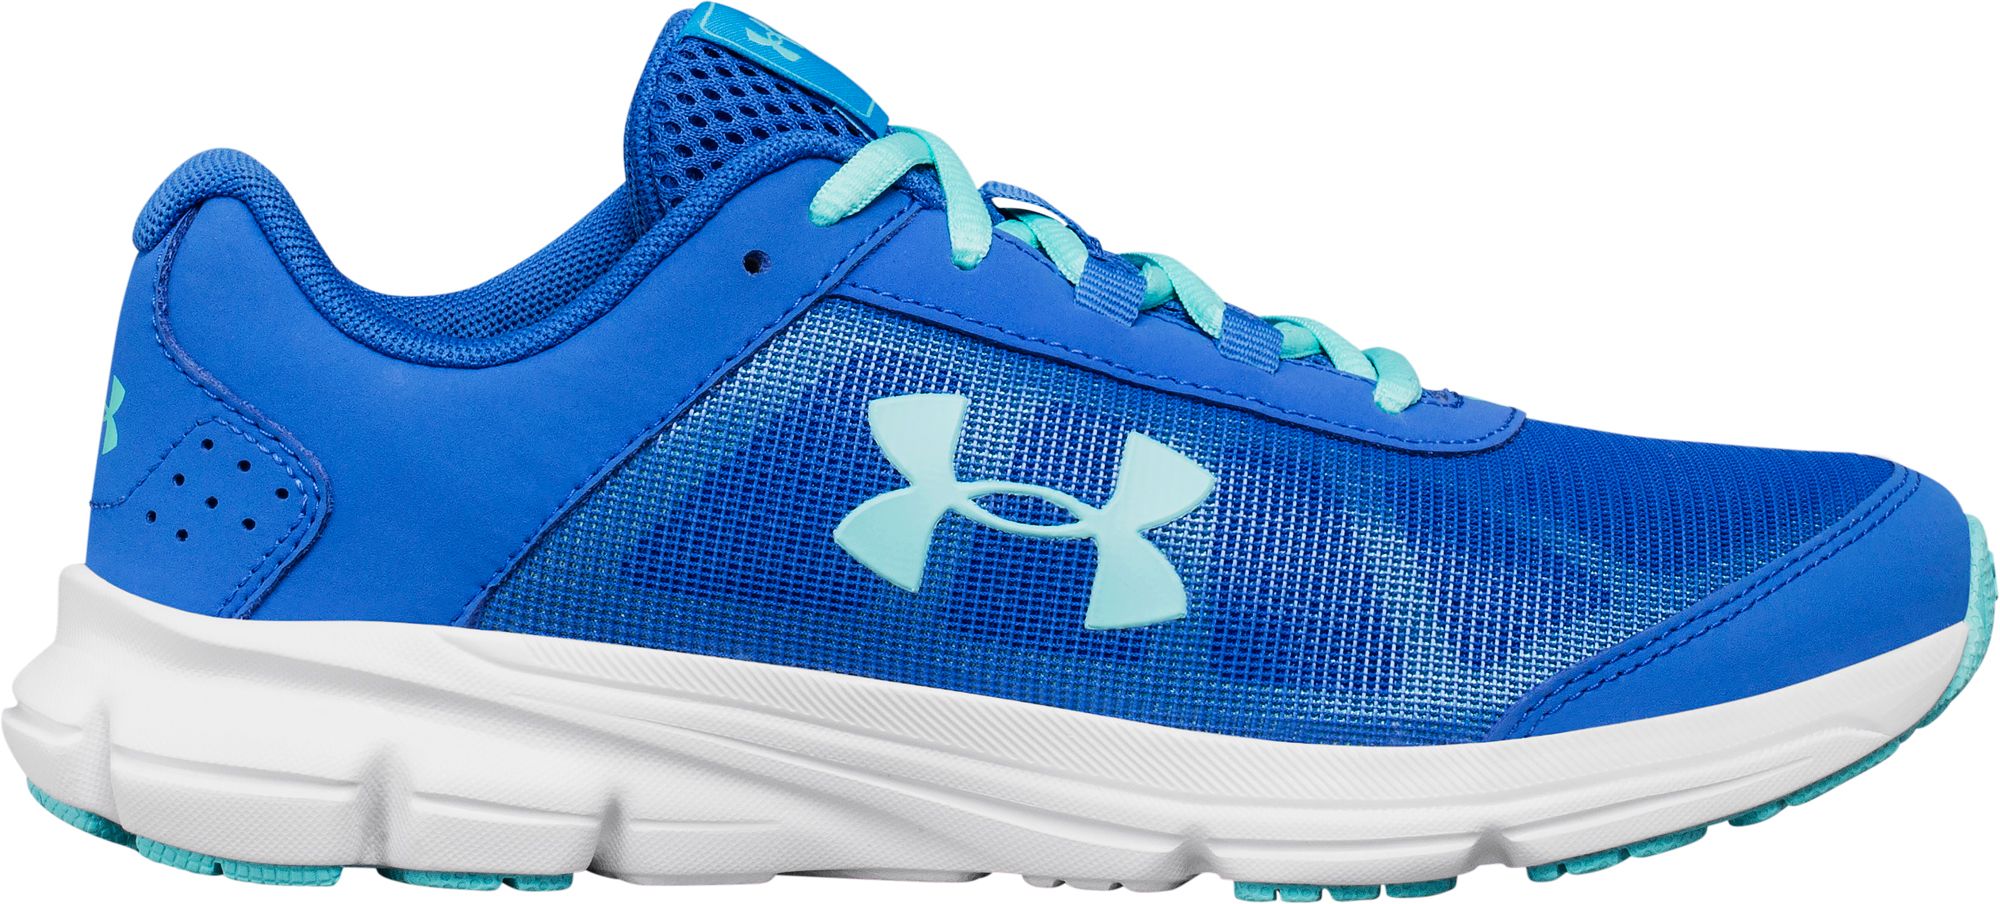 under armour rave 2